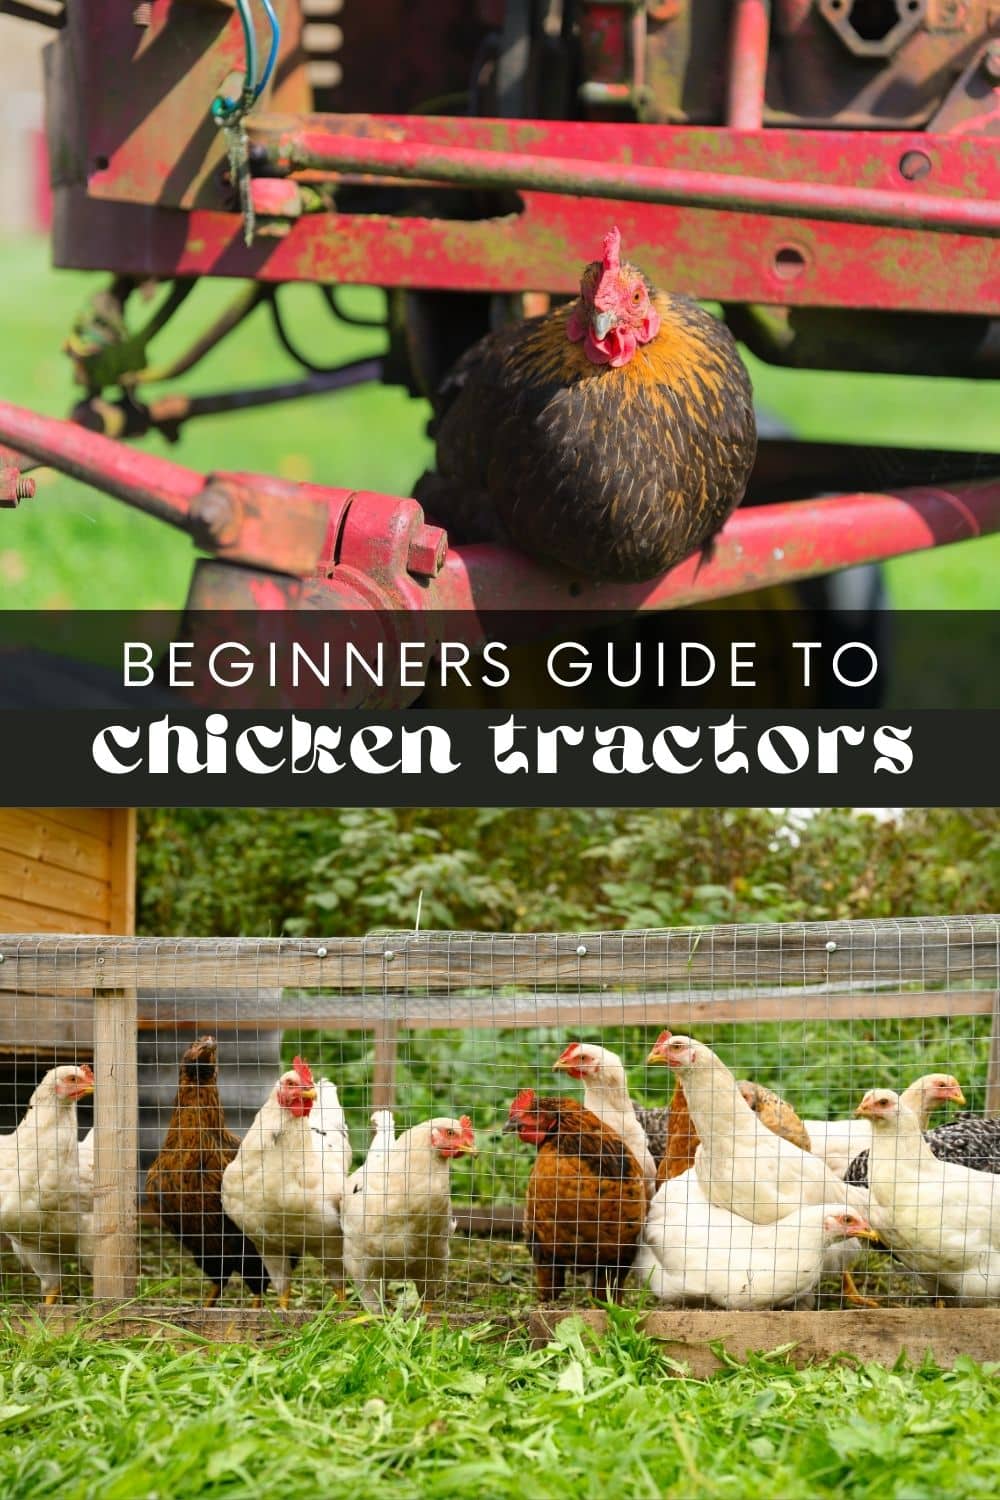 A chicken tractor is a portable chicken coop that can be easily moved around a yard or garden. It is designed to allow chickens to forage for insects and greens while providing them with a safe place to sleep and lay eggs. Chicken tractors can be a great way to have fresh eggs and fertilize your garden at the same time.